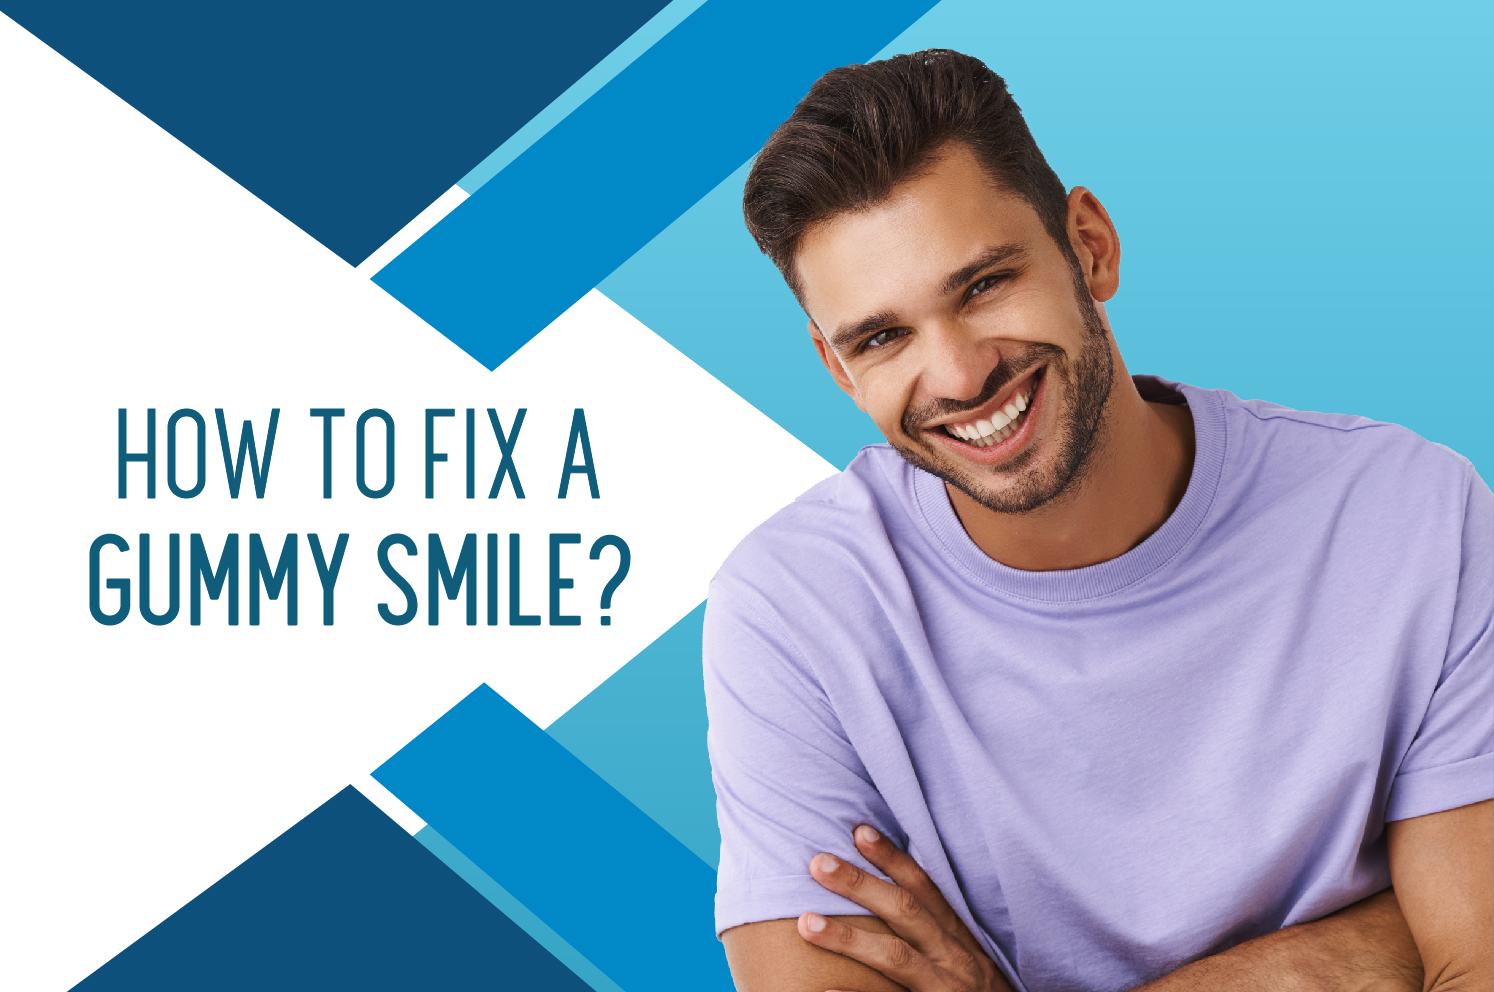 How to fix a gummy smile?